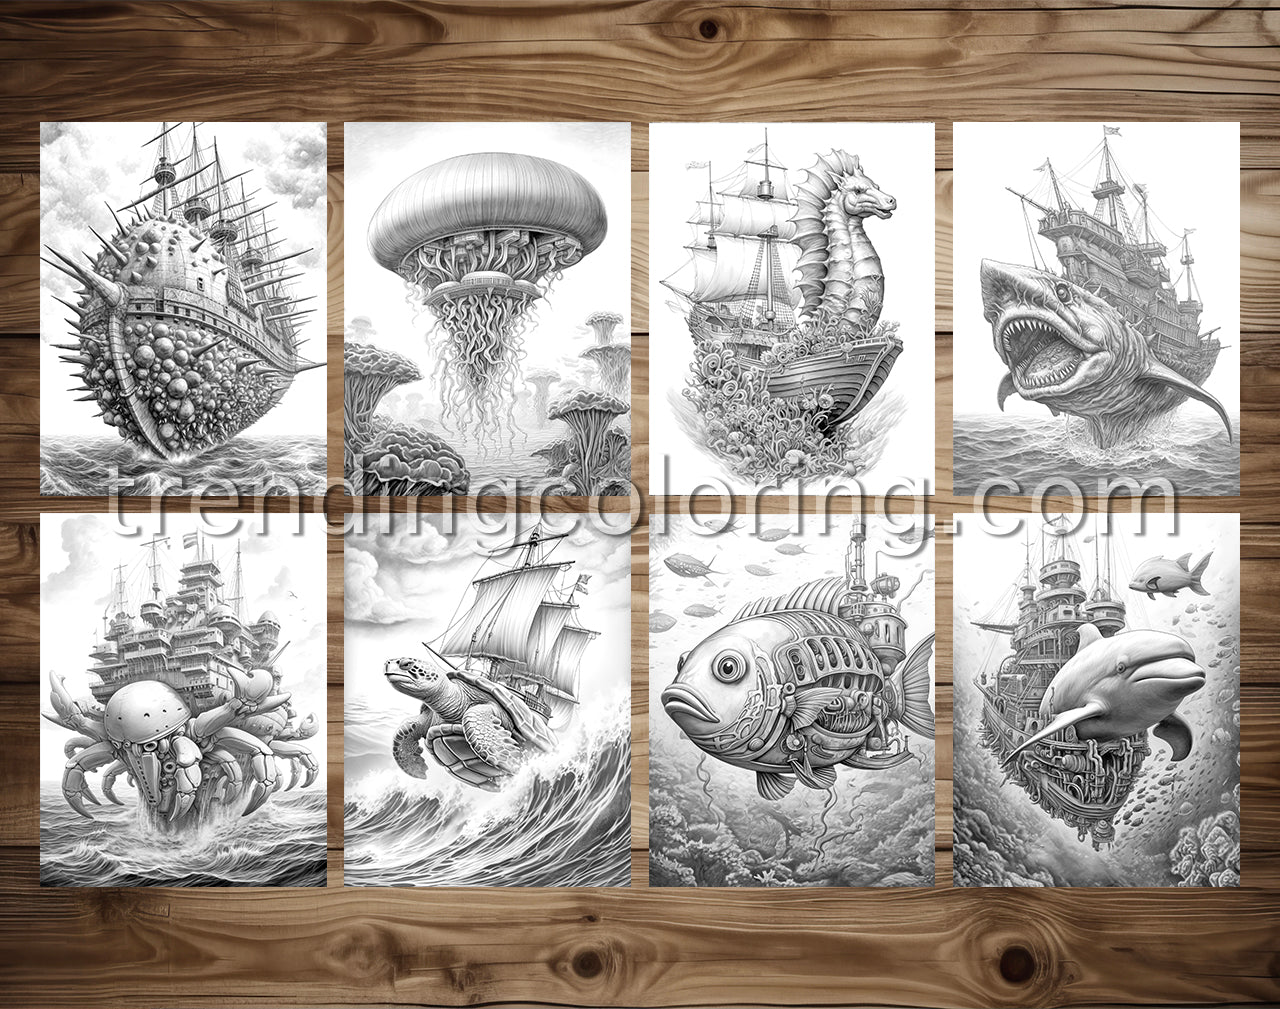 30 Fantasy Monster Ship Grayscale Coloring Pages - Instant Download - Printable PDF